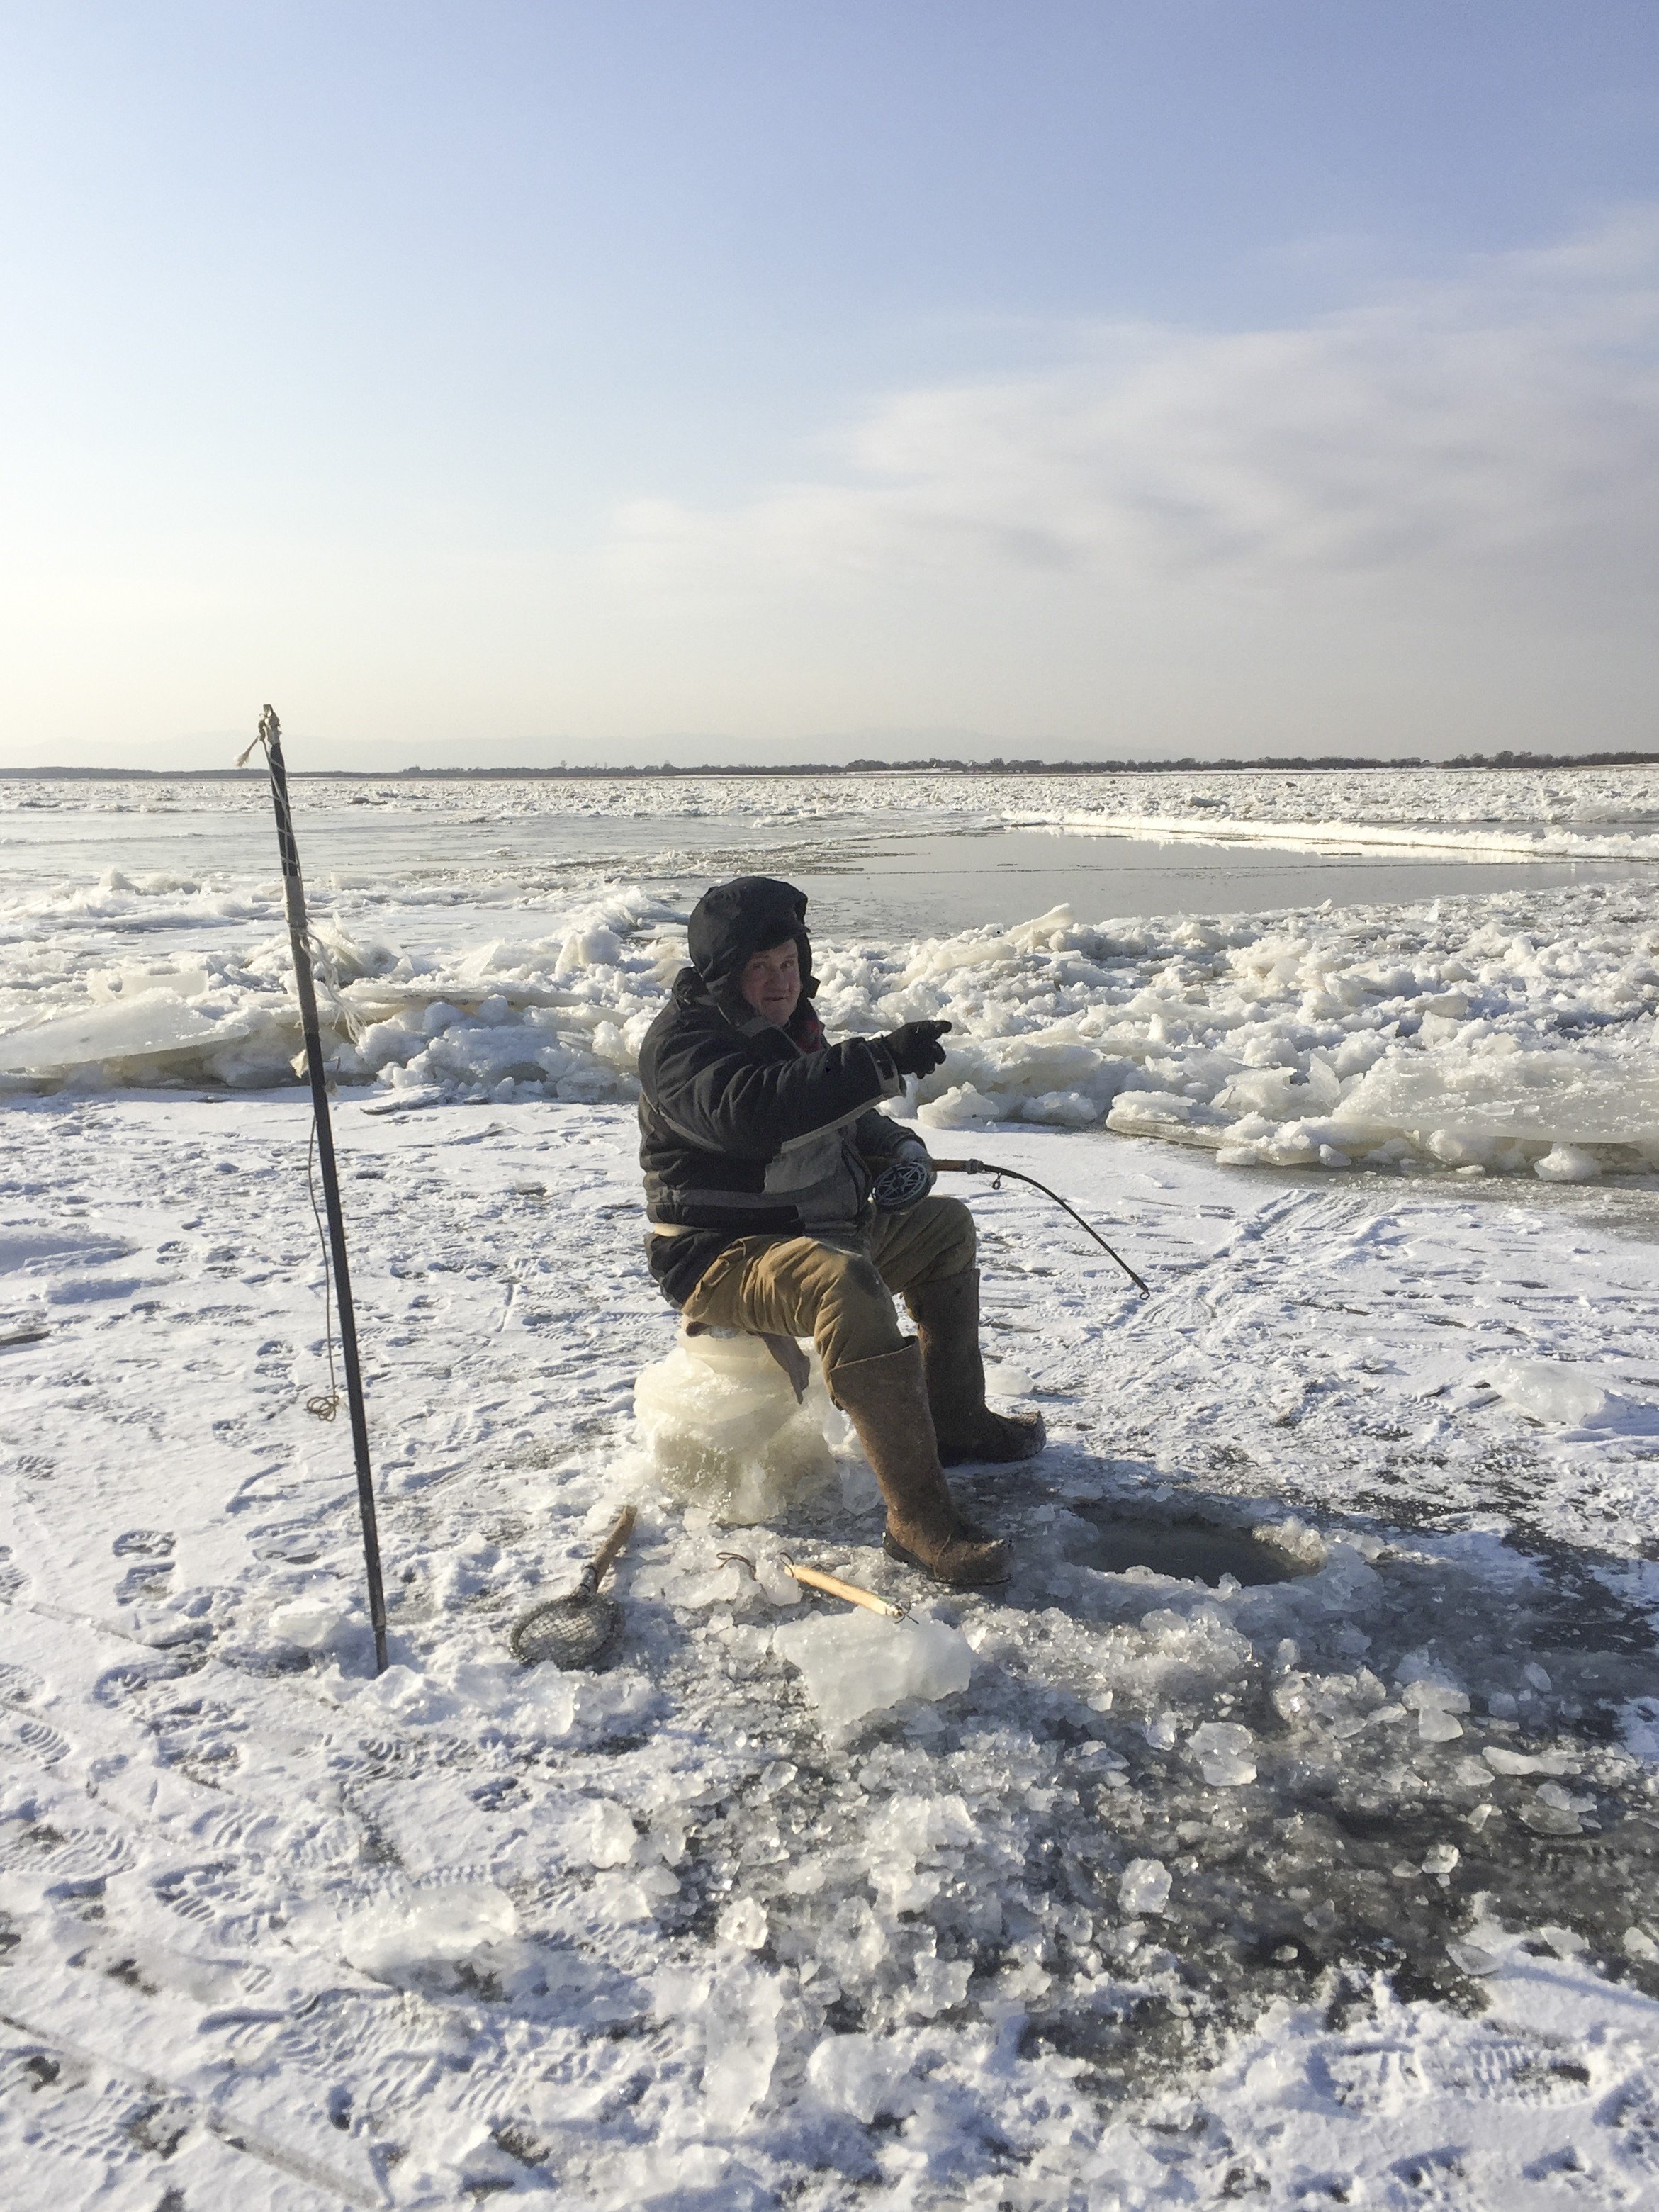 Ice fishing in Khabarovsk, Russia. Photo: Chris Taylor